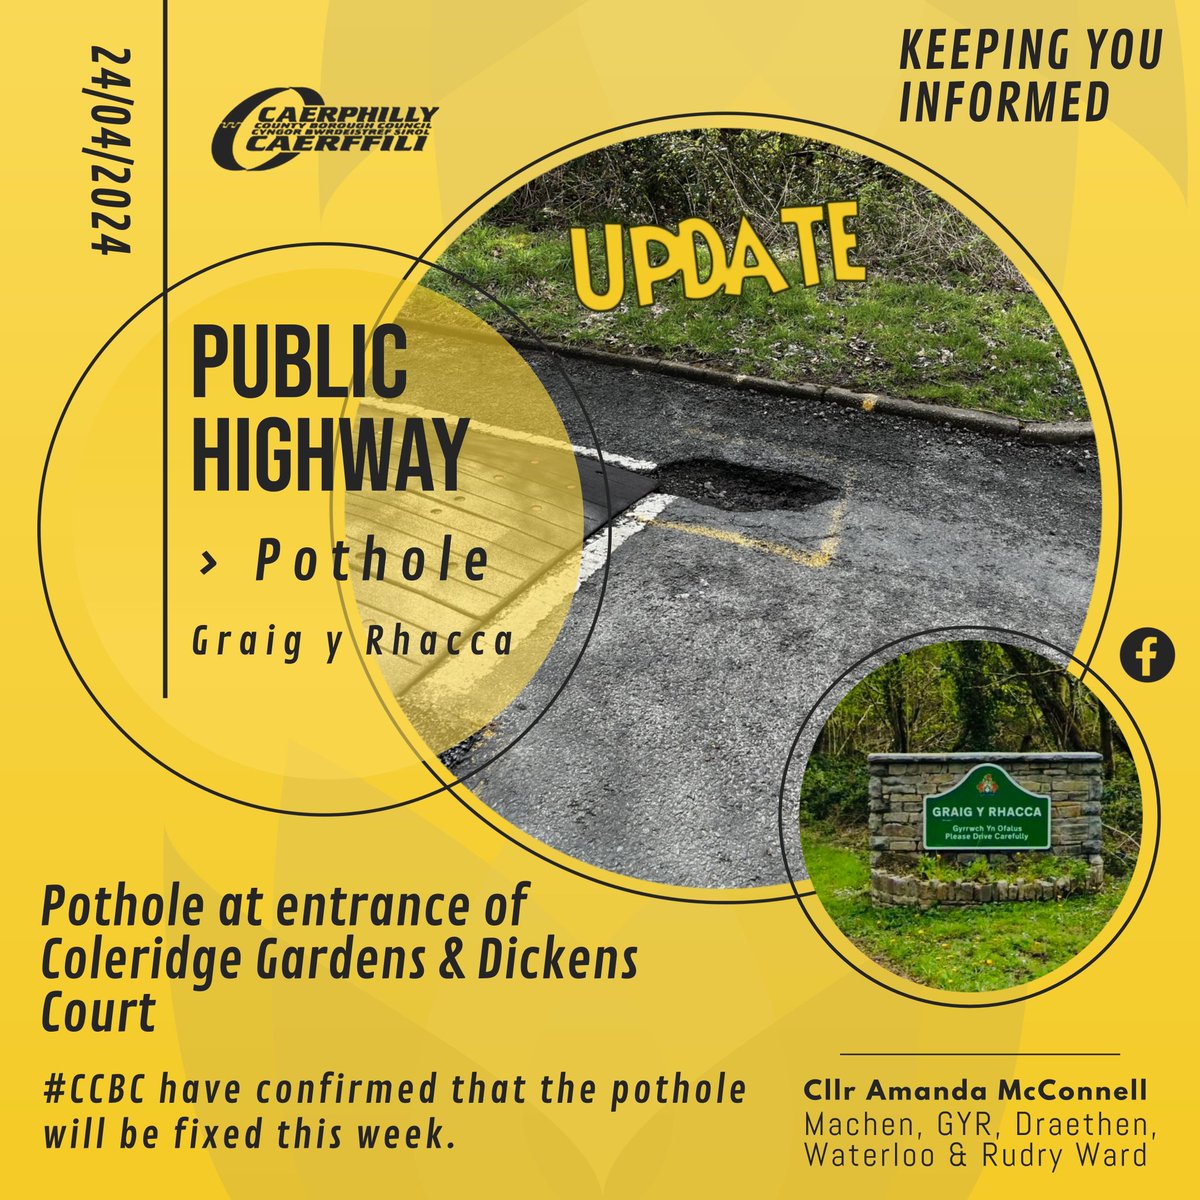 ⚠️ UPDATE: Pothole will be fixed this week! 

#MachenRudryWard #GYRarea #CCBC